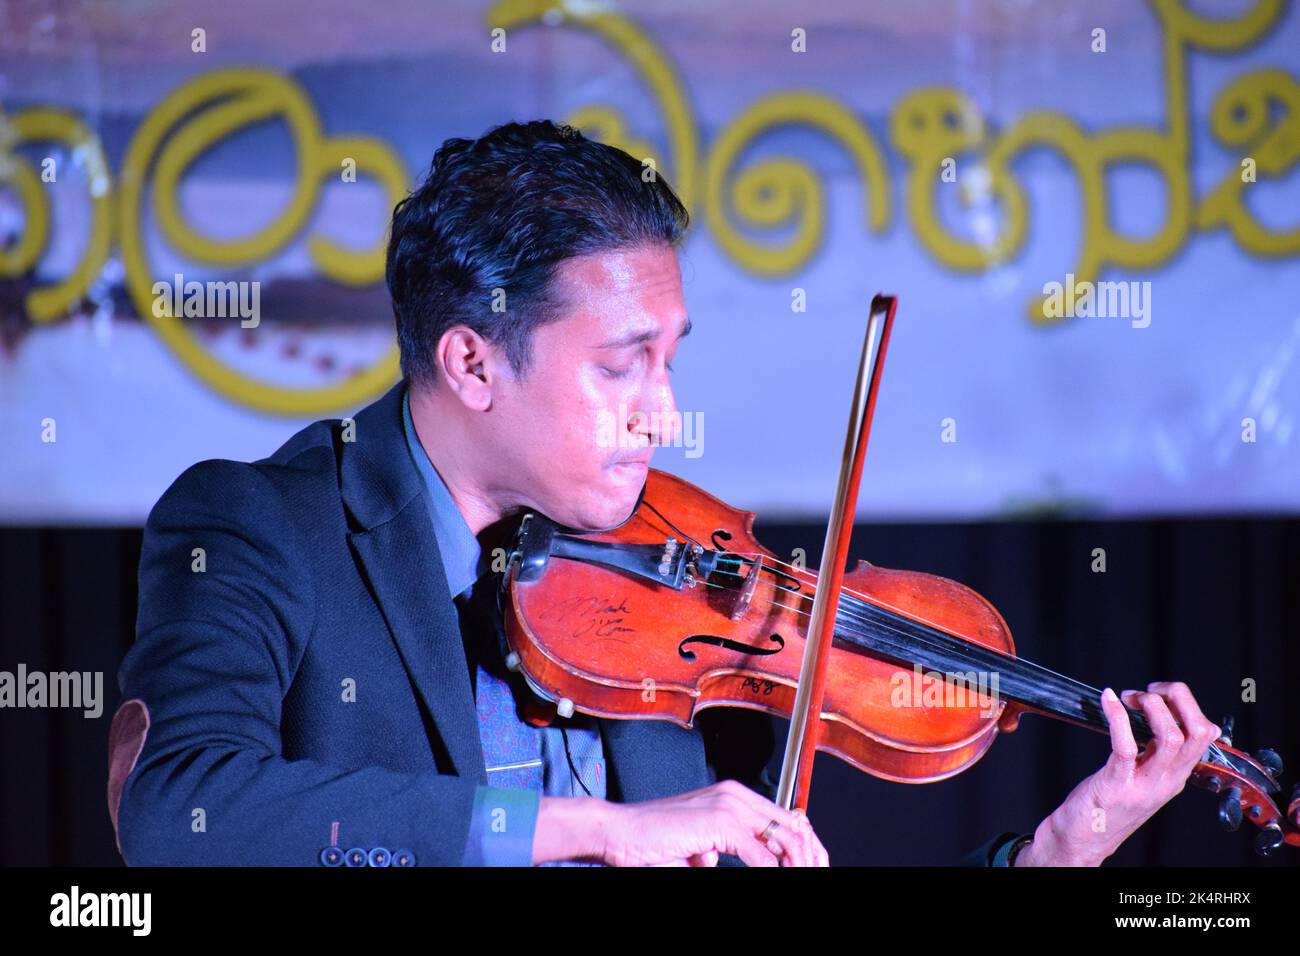 best performance of violinist Stock Photo